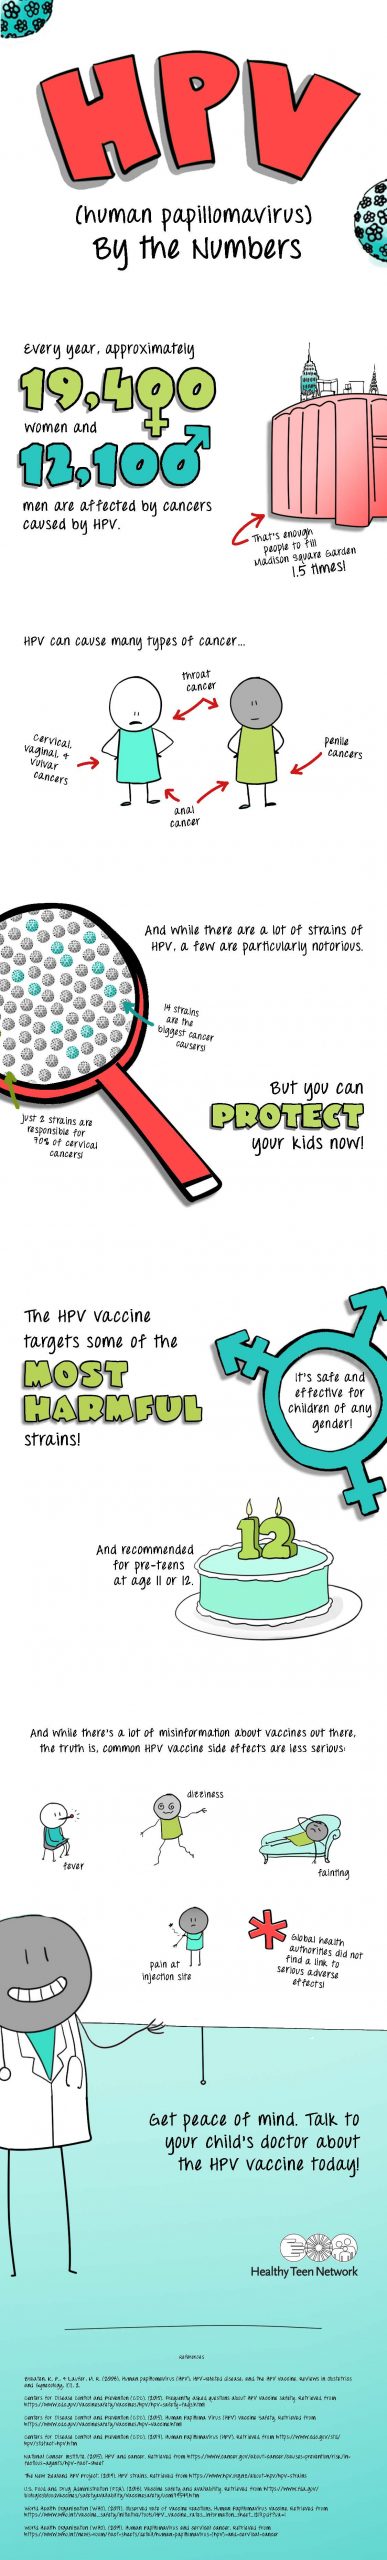 Infographic about HPV and HPV vaccine